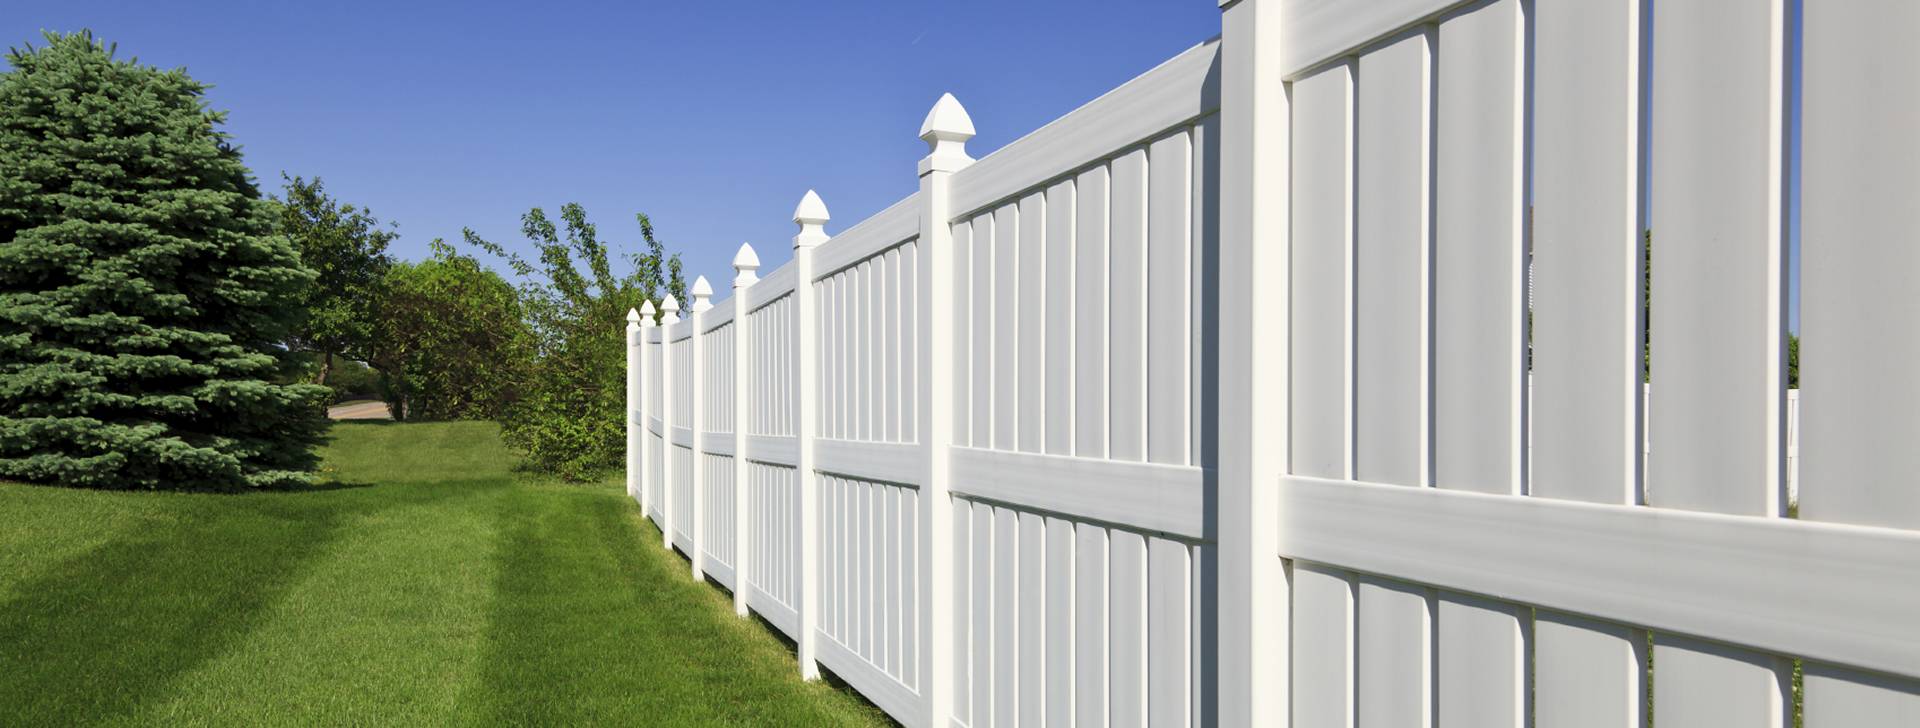 Triple Creek Yardscapes has been installing
beautiful fences in Minnesota for many years